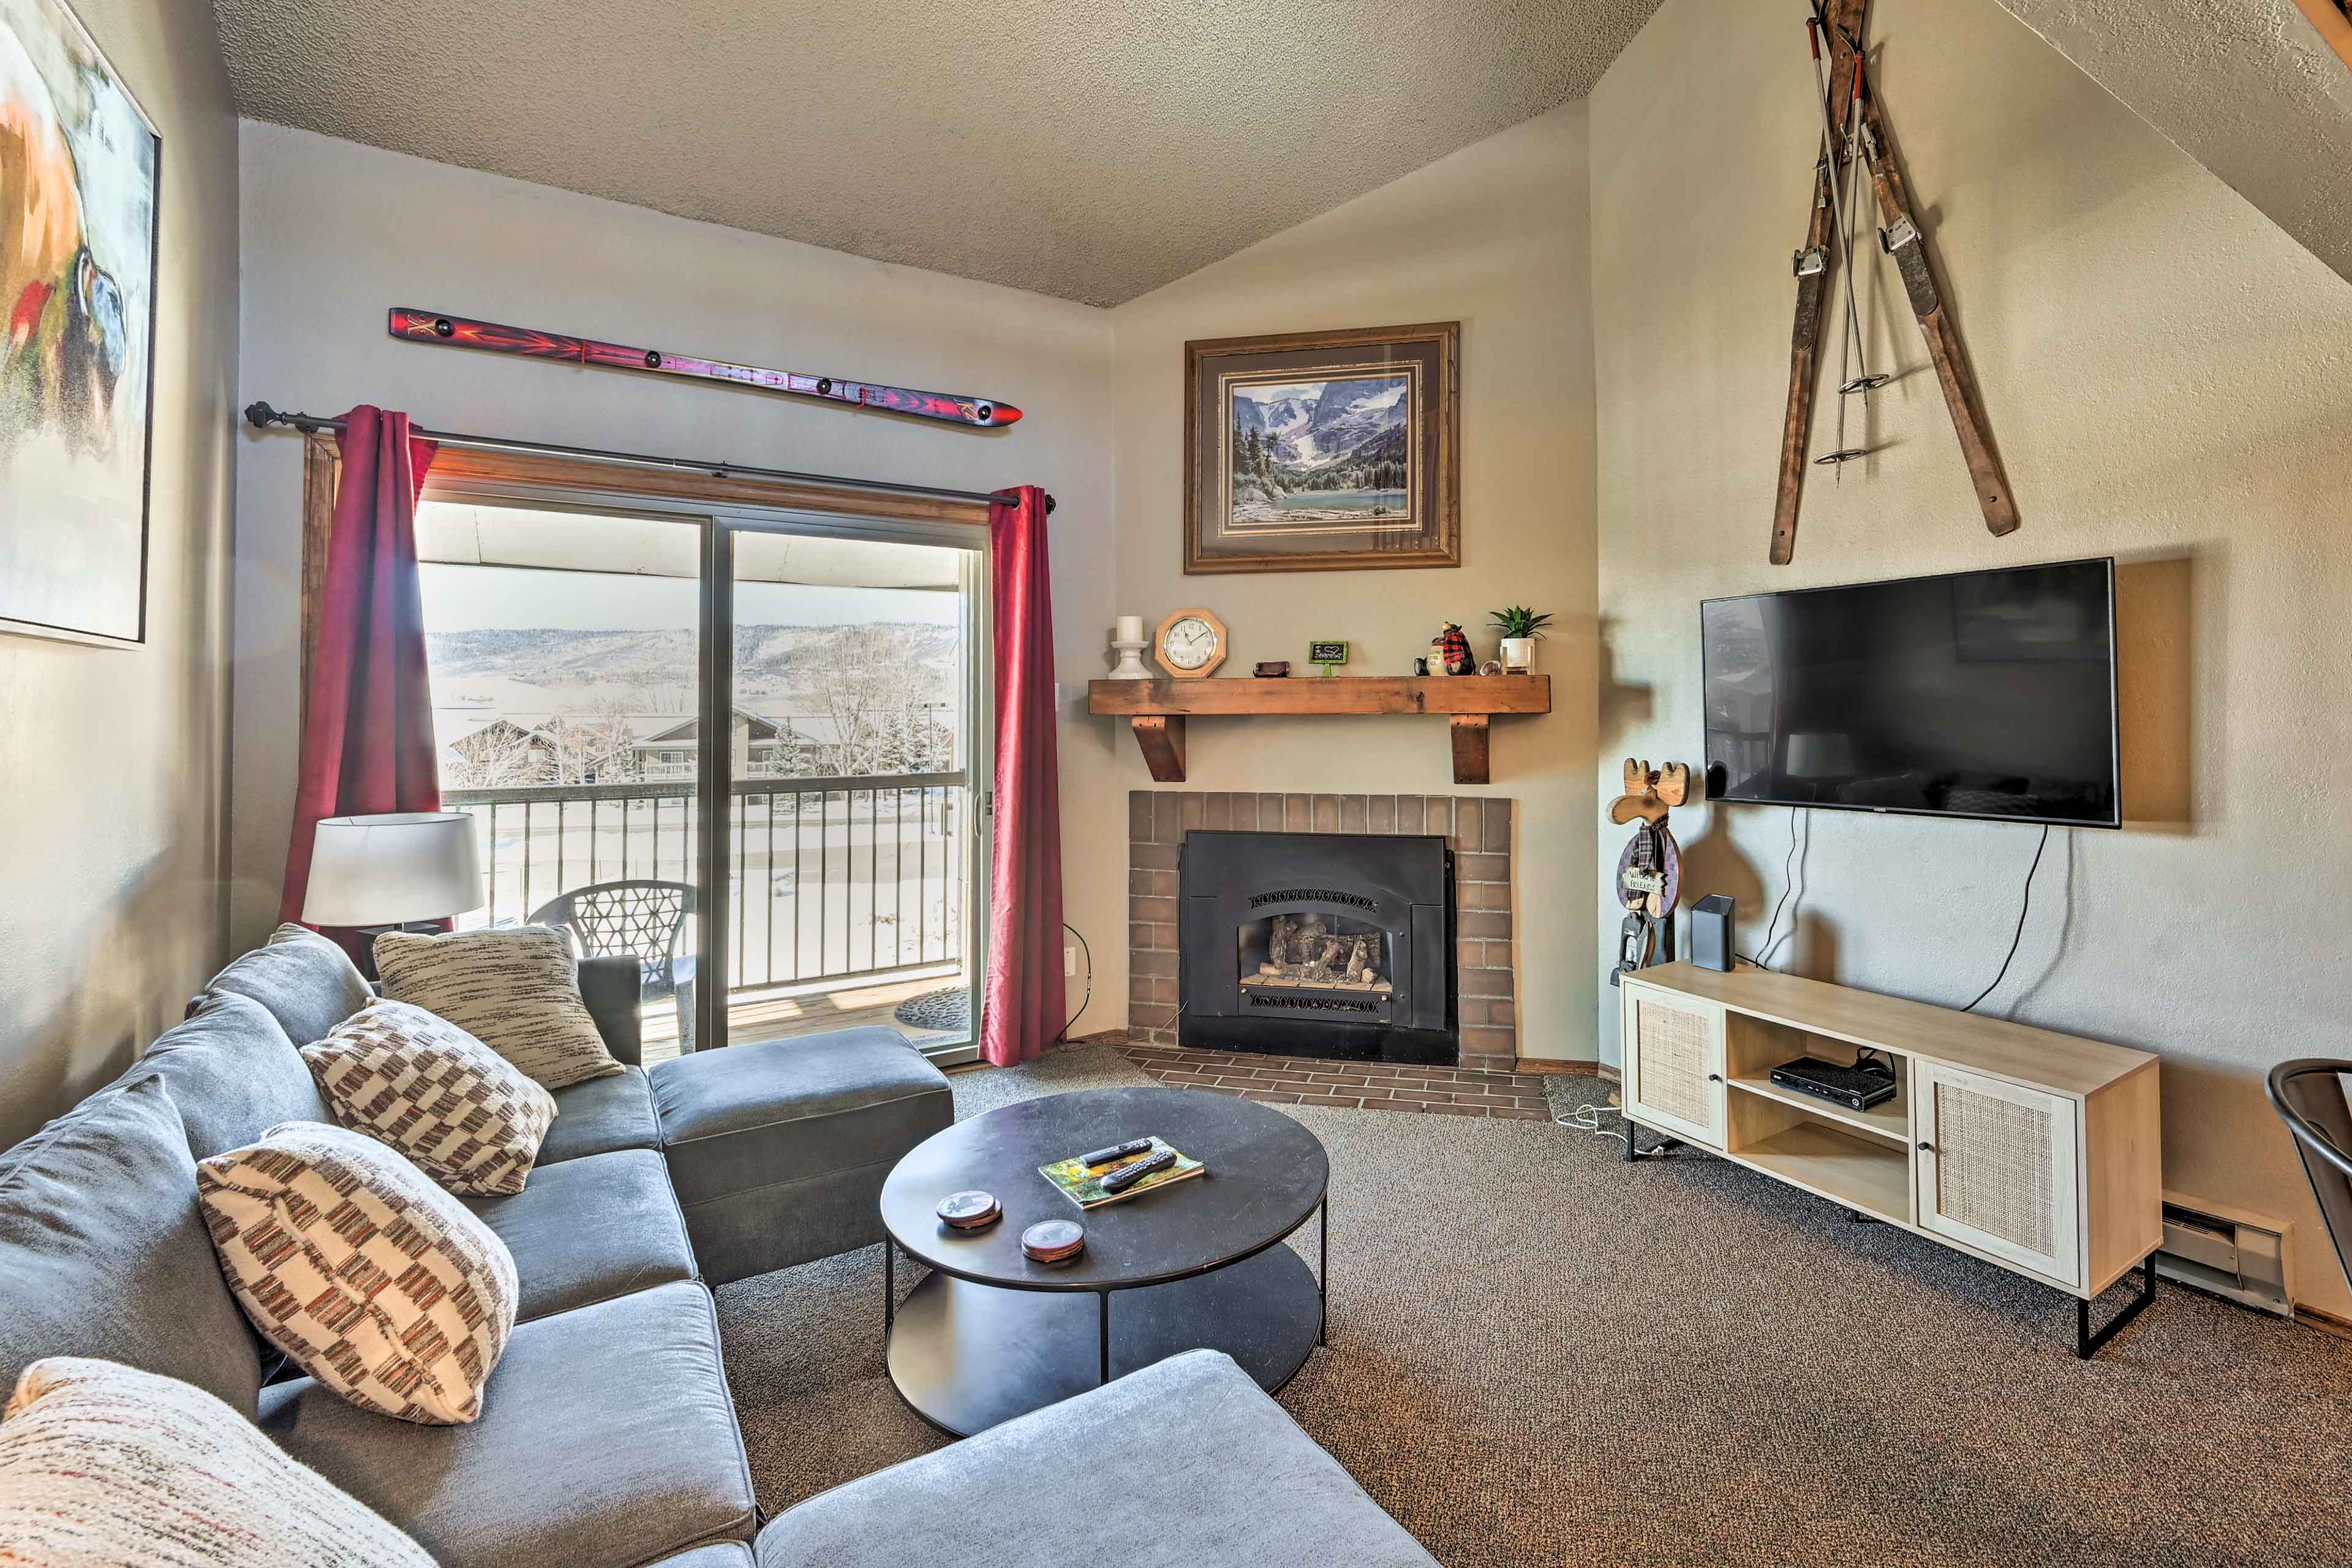 Steamboat Springs Vacation Rental | 2BR | 2BA | 1,377 Sq Ft | Stairs Required